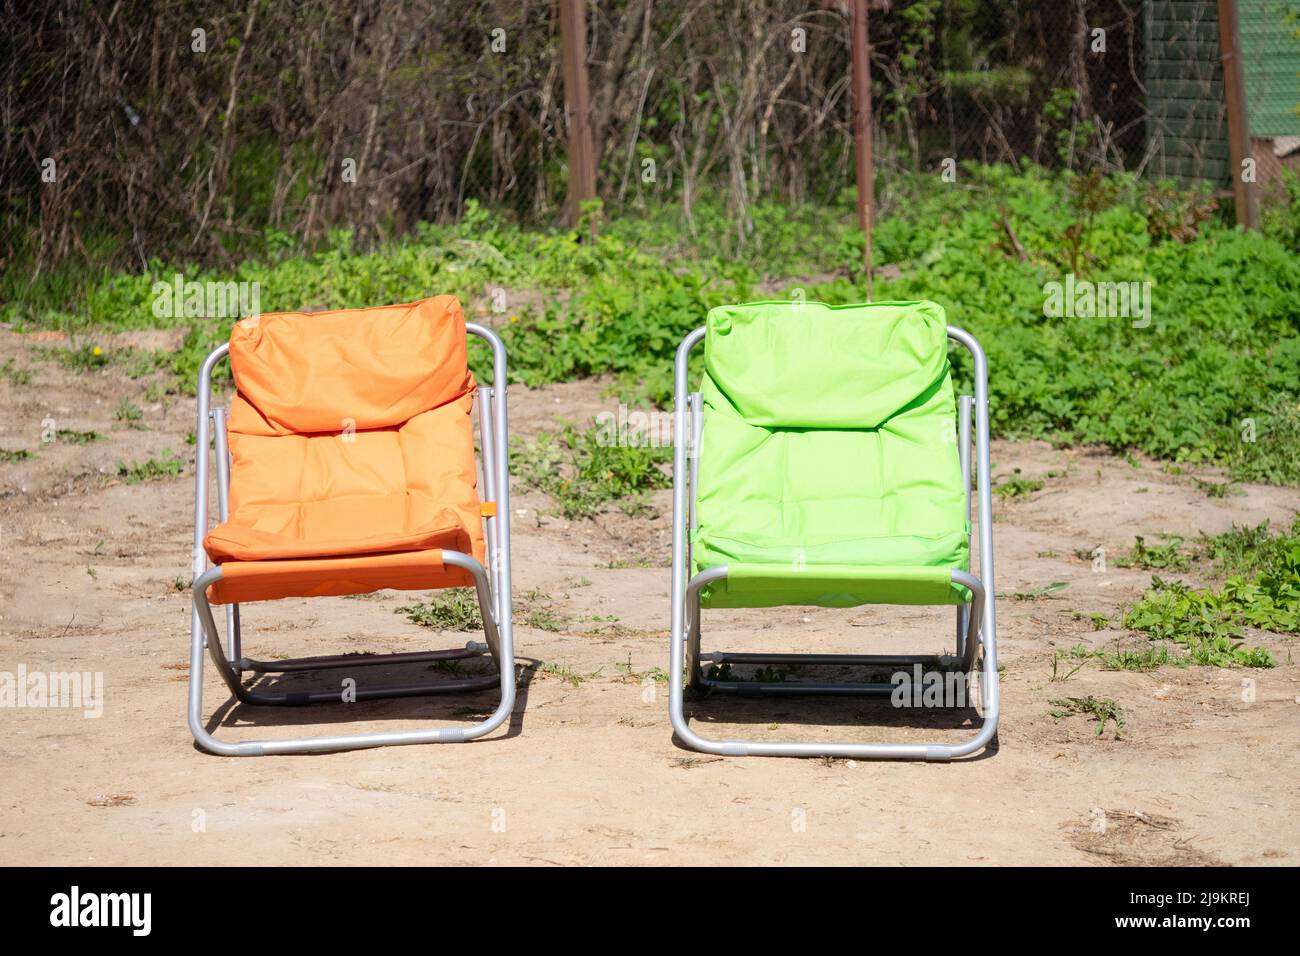 Orange and green folding tourist chair for leisure on the background of brown earth, green grass, iron mesh fence under sun Stock Photo